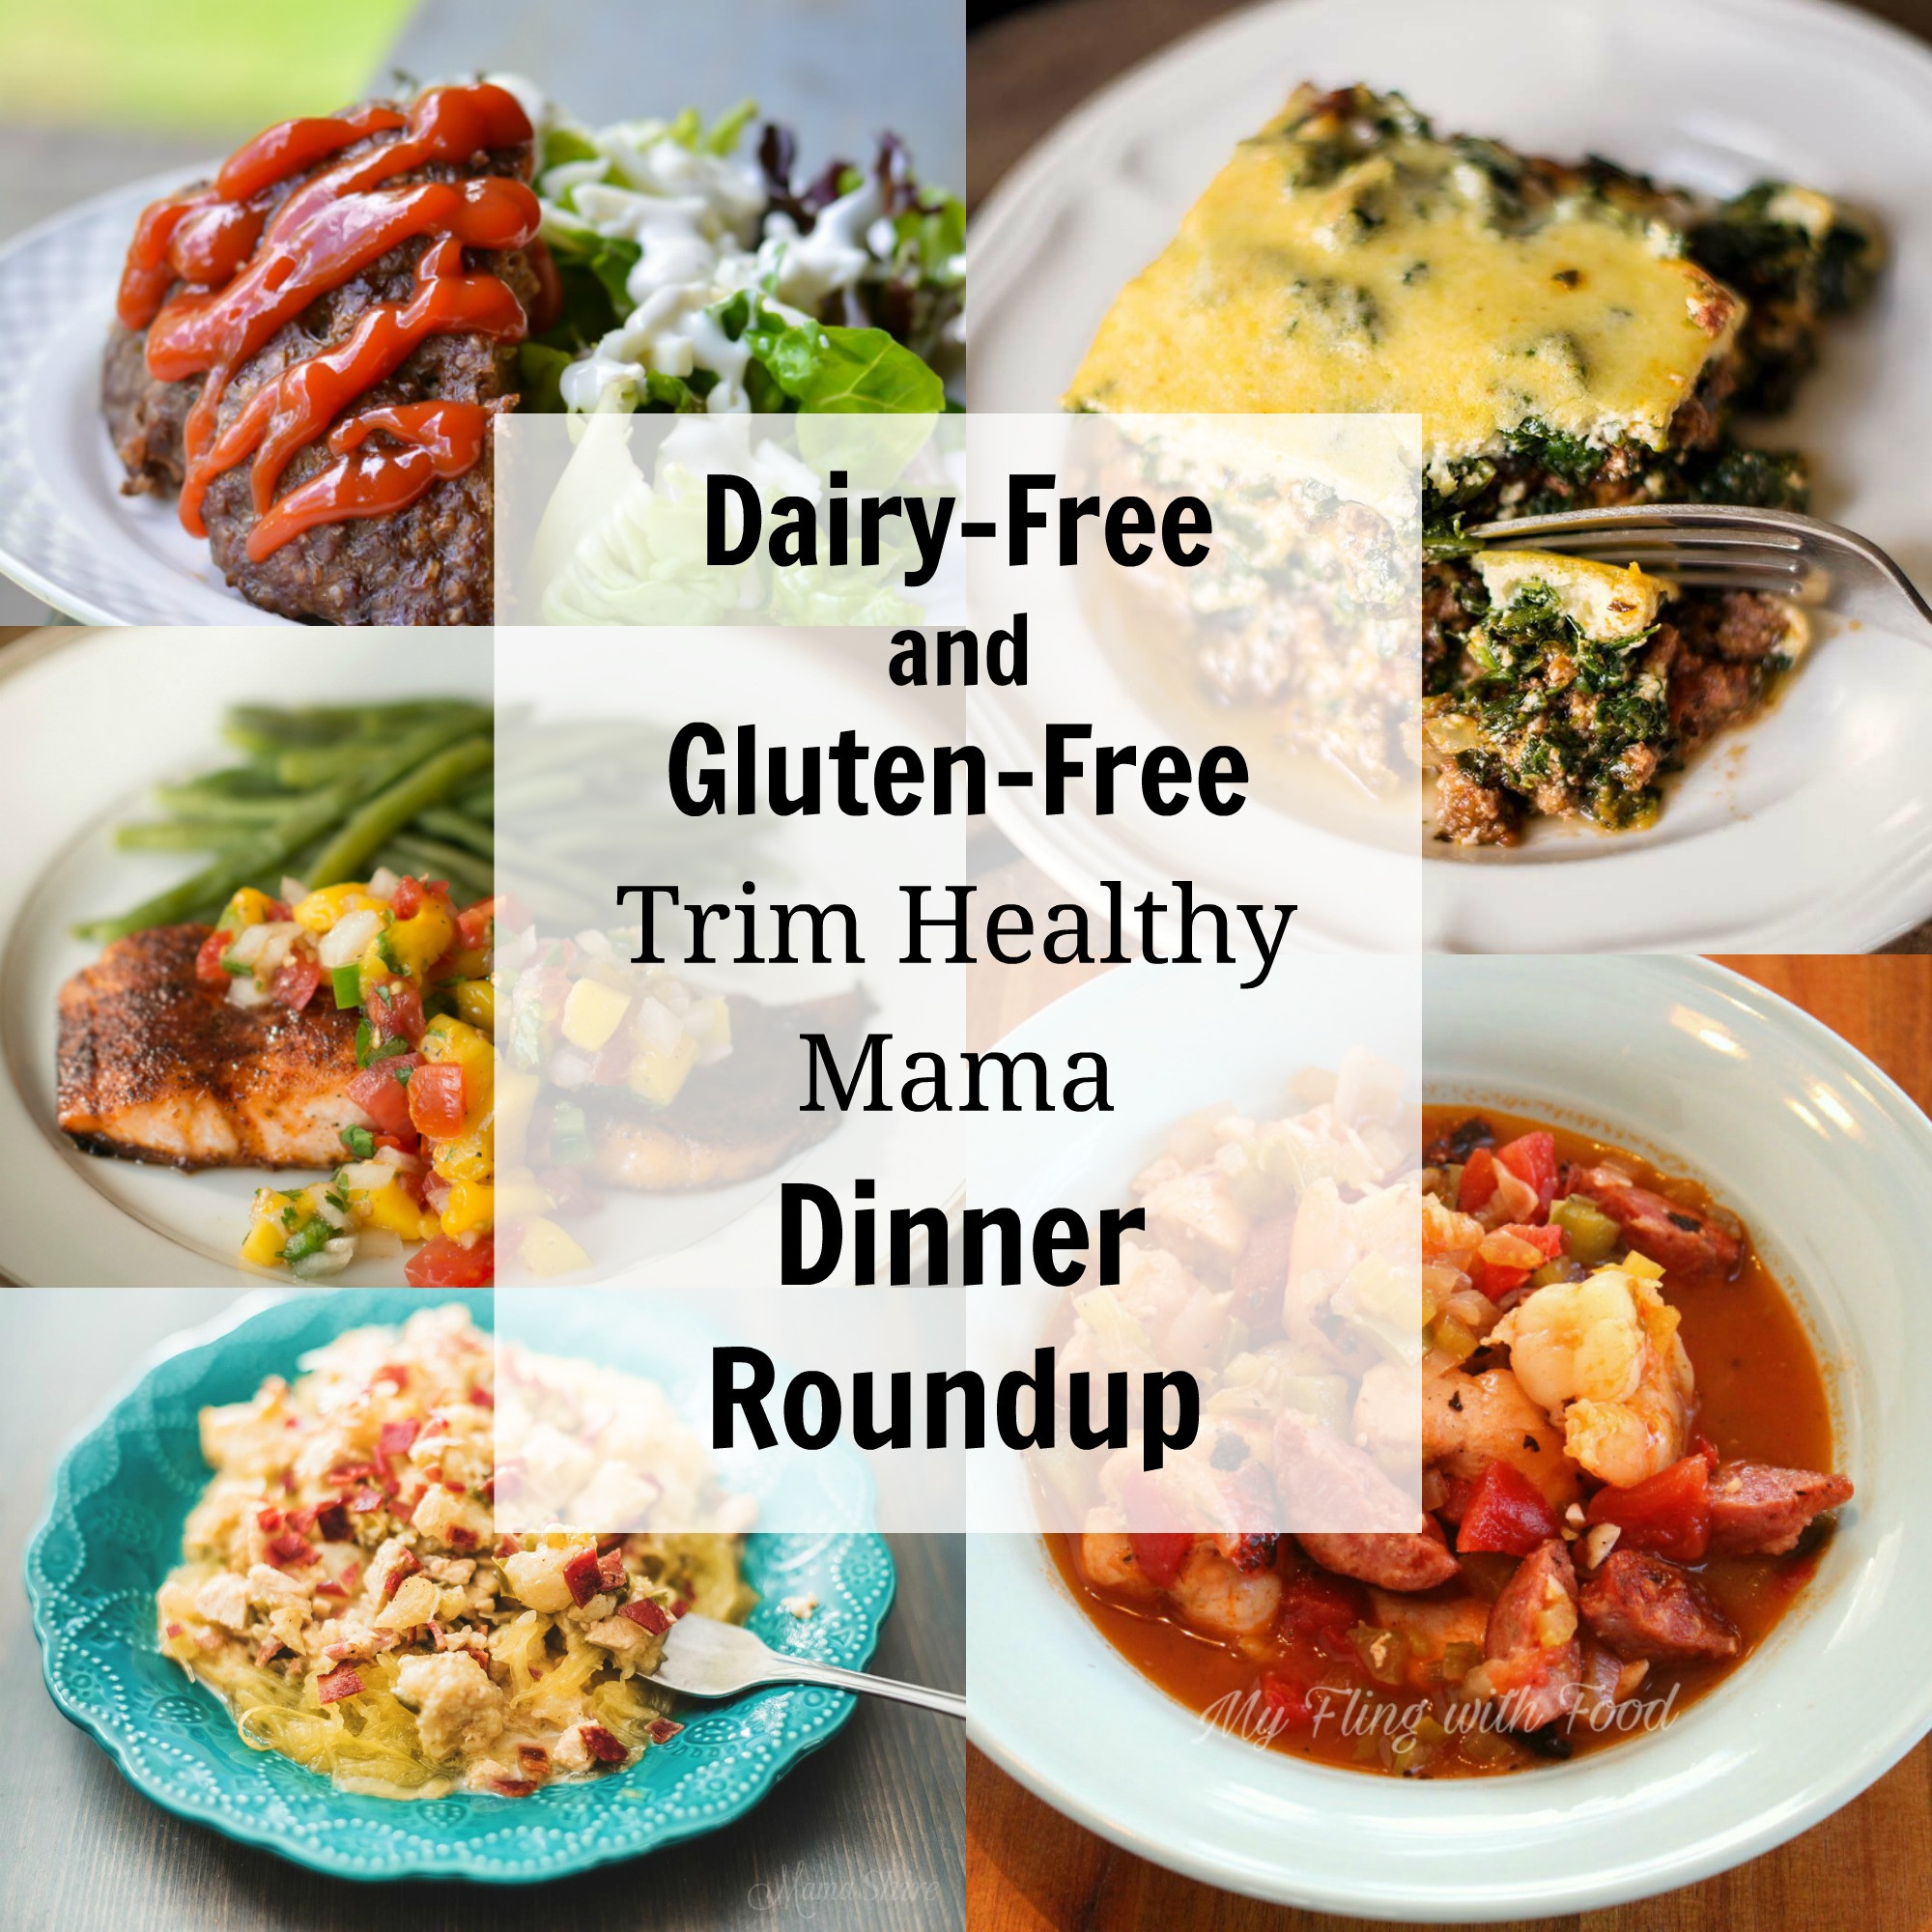 Healthy Dairy Free Recipes
 Dairy Free and Gluten Free Trim Healthy Mama Dinners